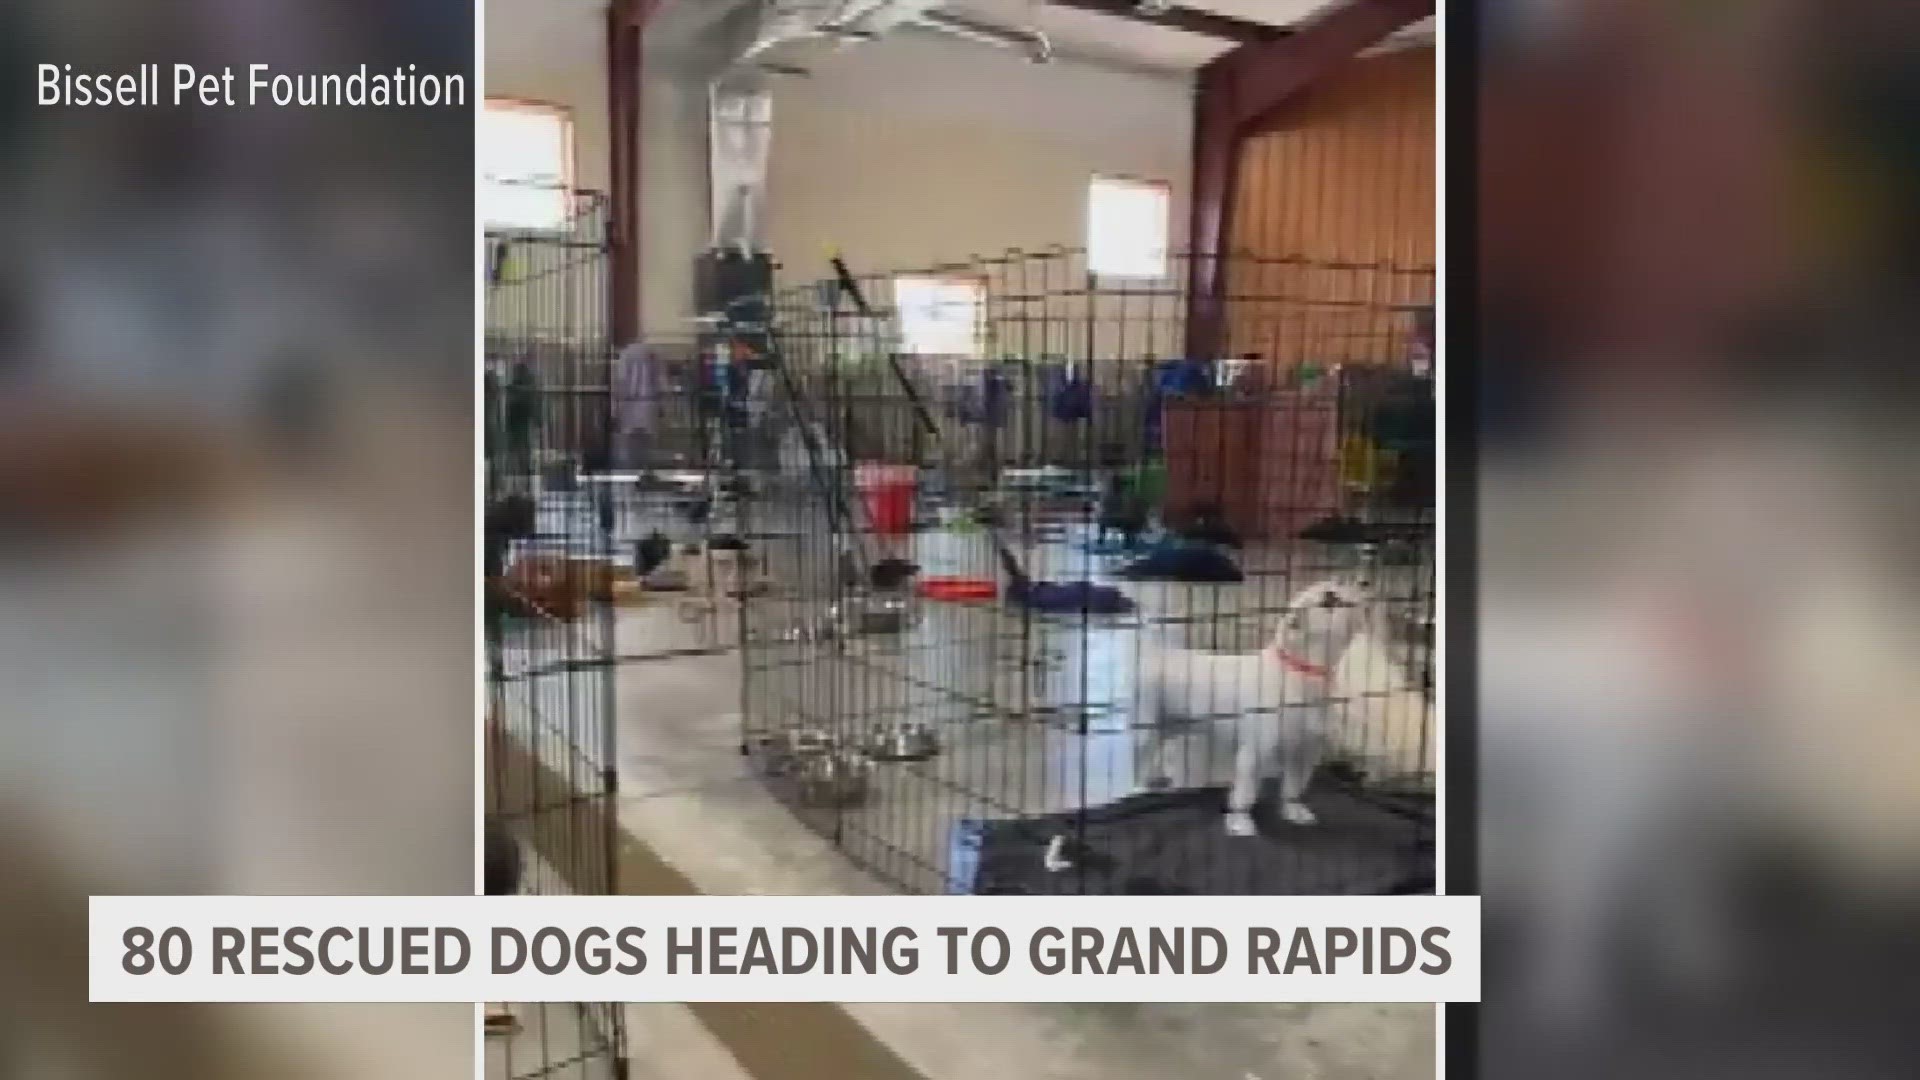 The Bissell Pet Foundation is helping fund the rescue. The dogs are now being cared for at a facility in Missouri, awaiting transport to their new home states.